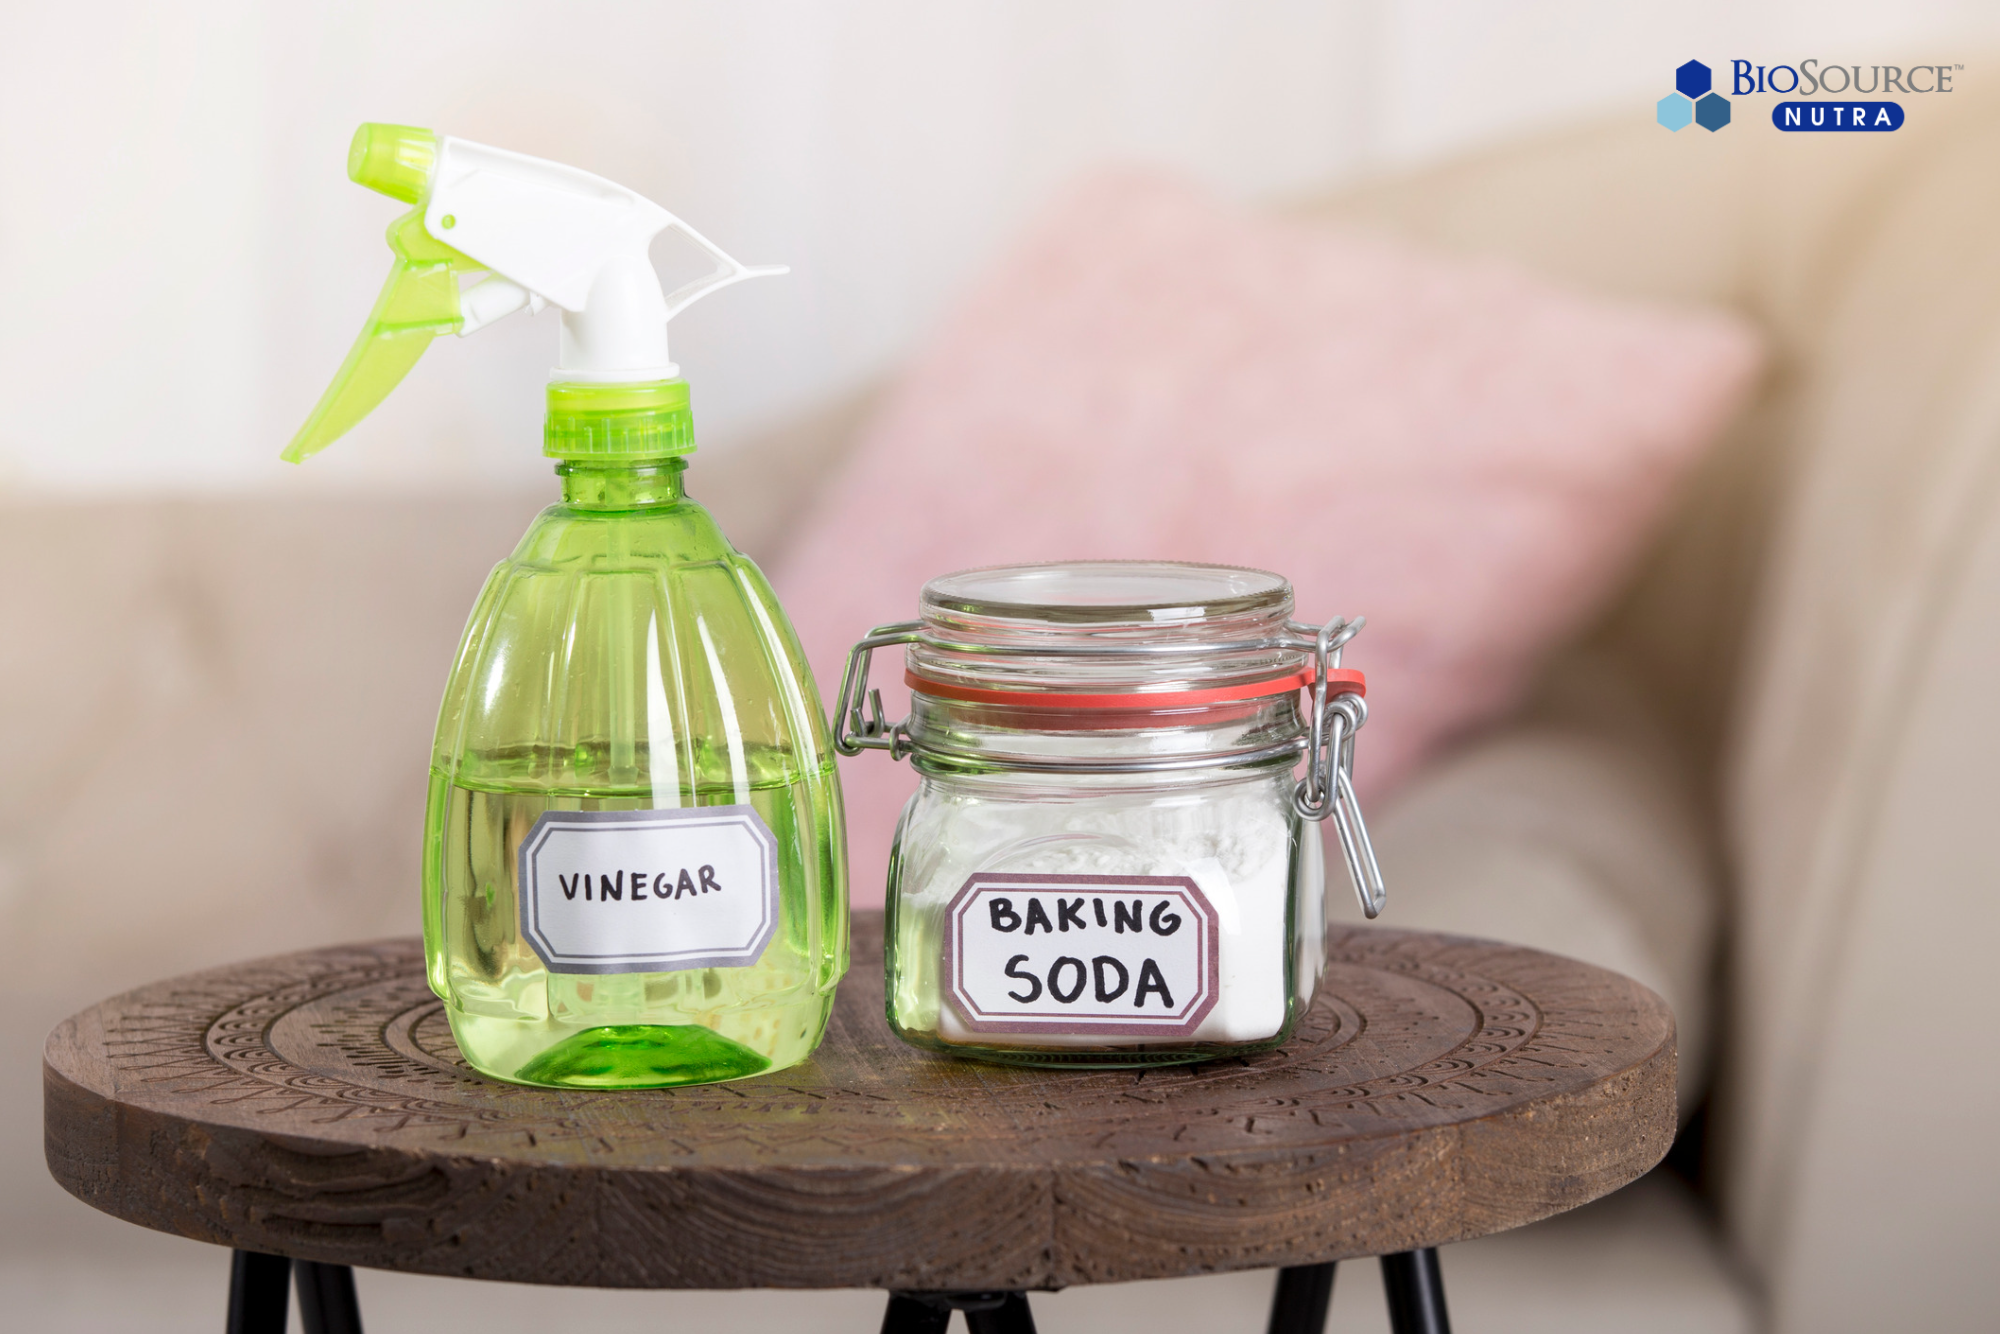 A spray bottle of vinegar and a glass jar of baking soda